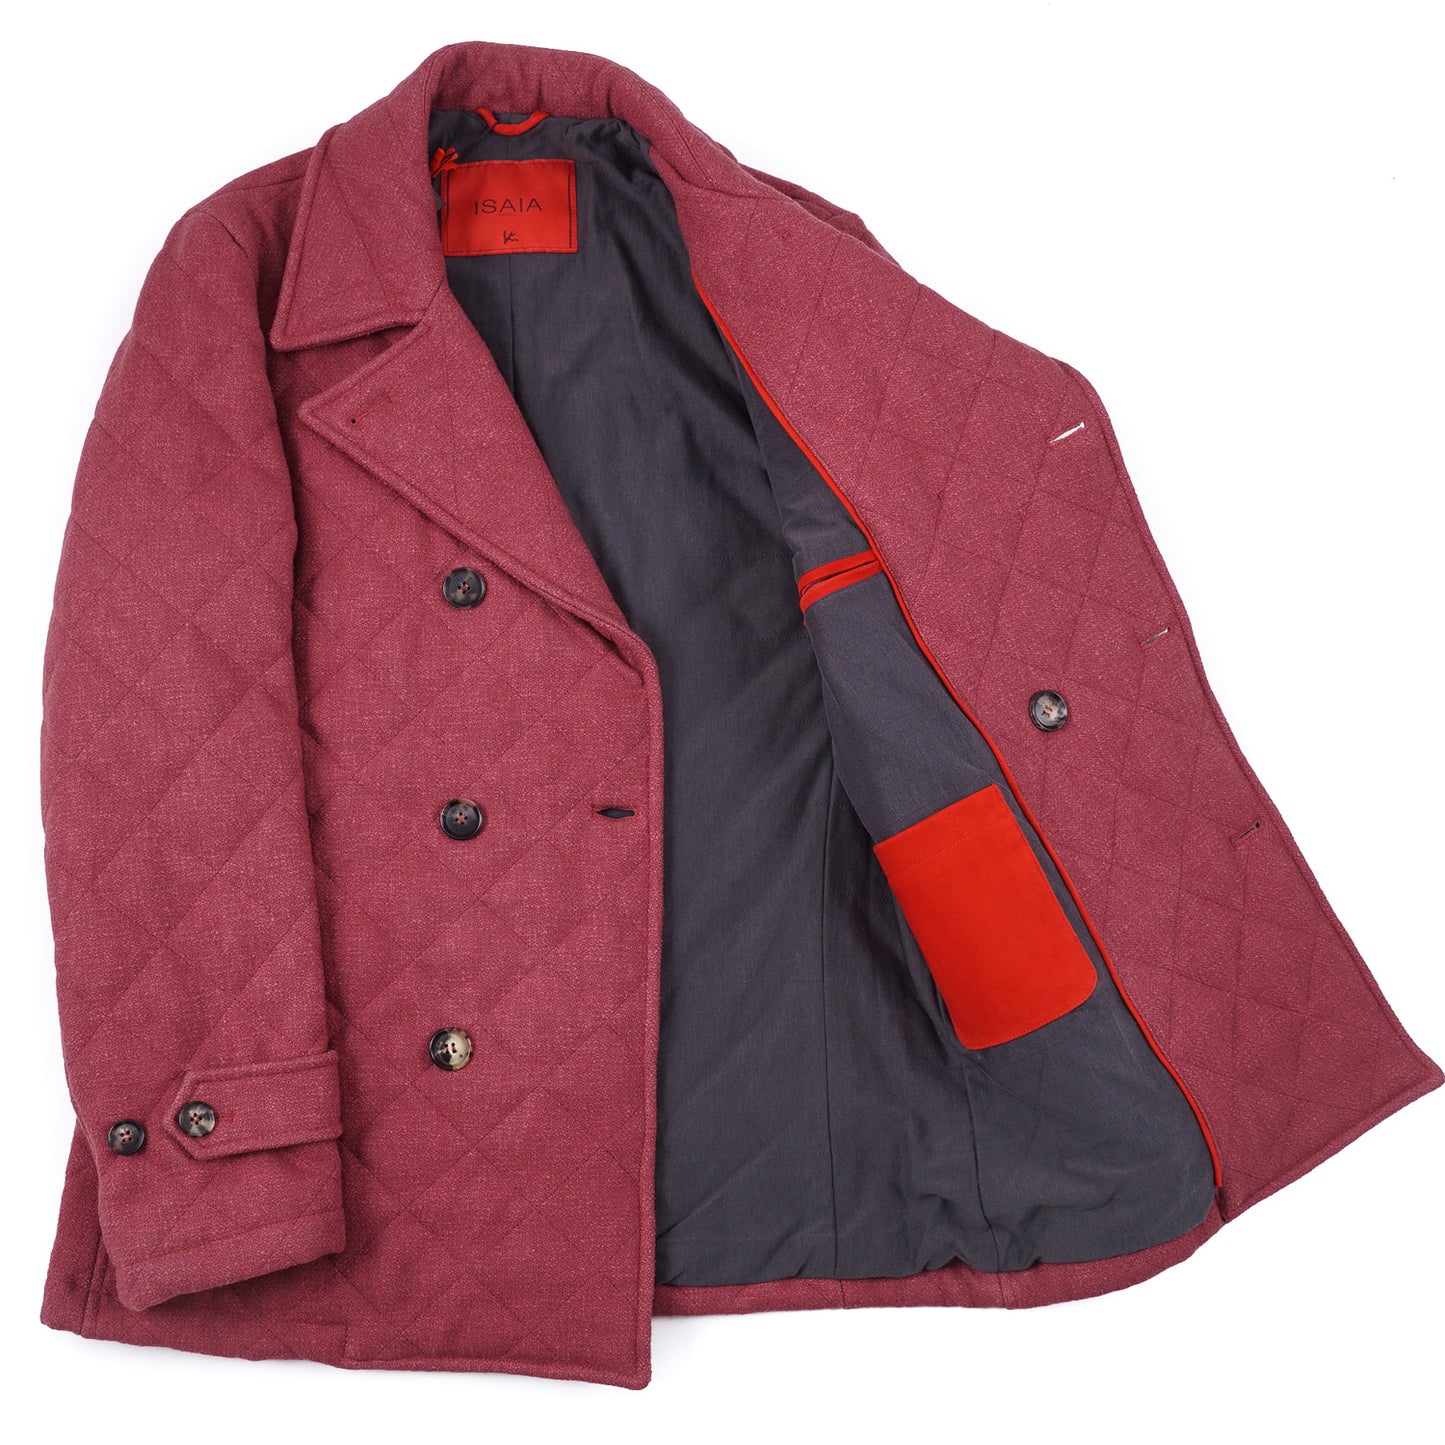 Isaia Quilted Wool and Silk Pea Coat - Top Shelf Apparel